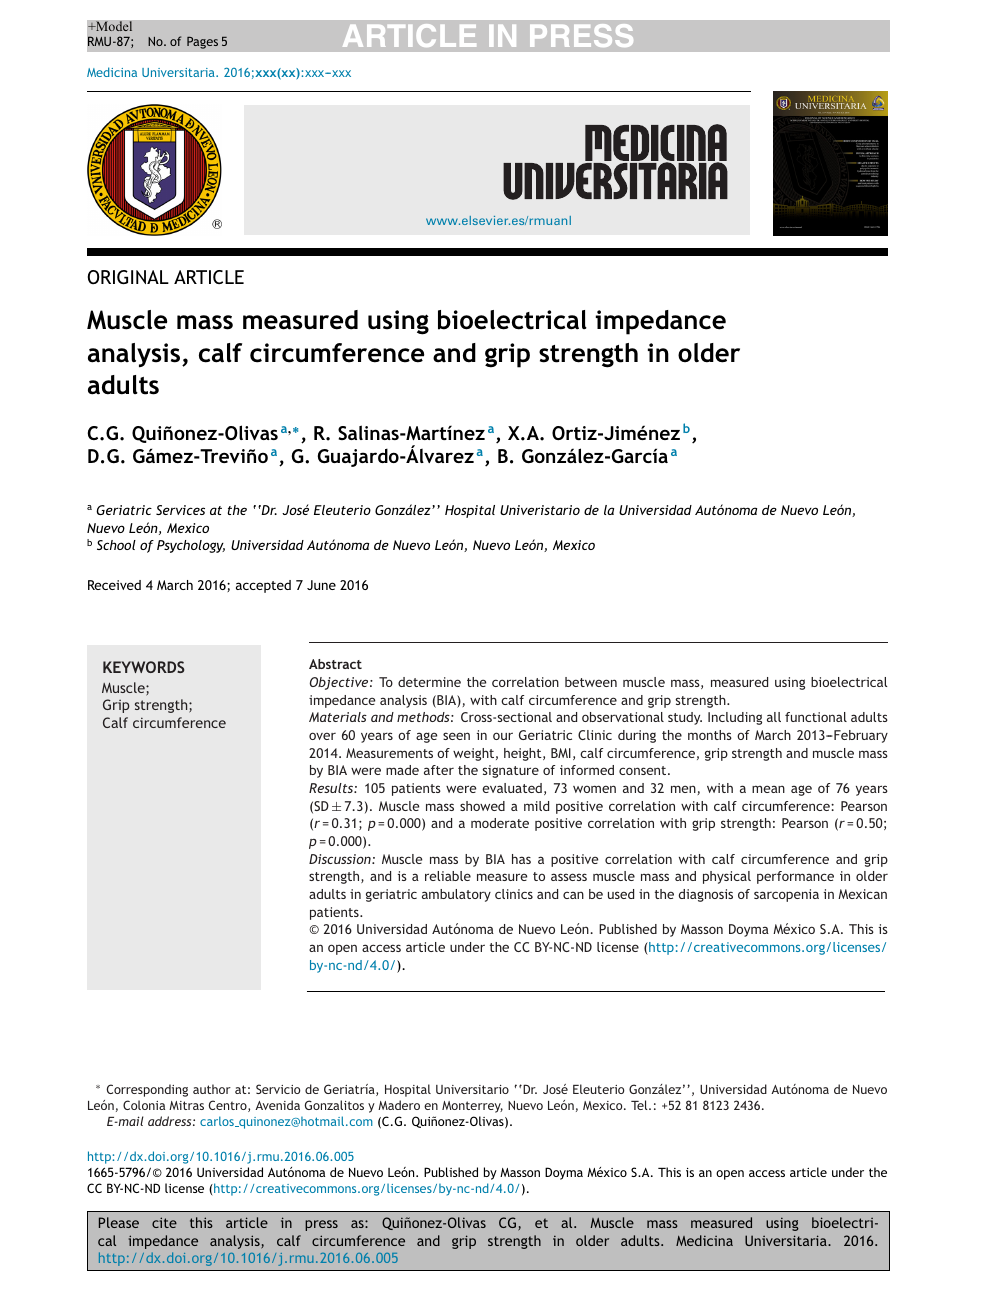 Muscle Mass Measured Using Bioelectrical Impedance Analysis Calf Circumference And Grip Strength In Older Adults Topic Of Research Paper In Clinical Medicine Download Scholarly Article Pdf And Read For Free On